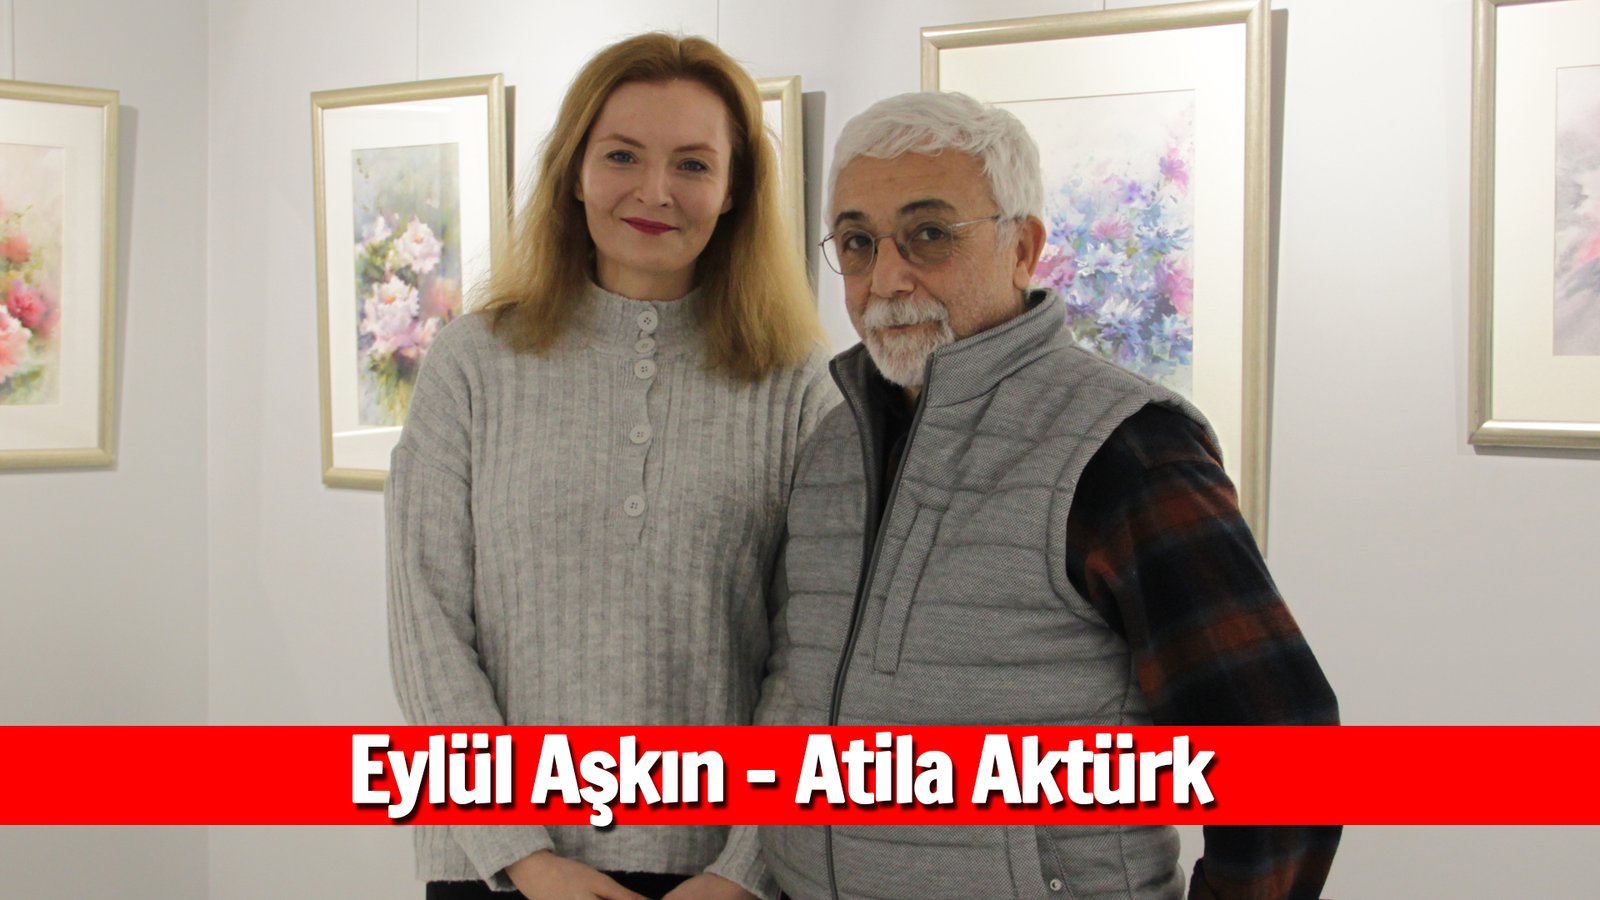 I Painted That The Turban Would Be A Problem In This Country Atila Aktürk, Eylül Aşkın Interview (1)